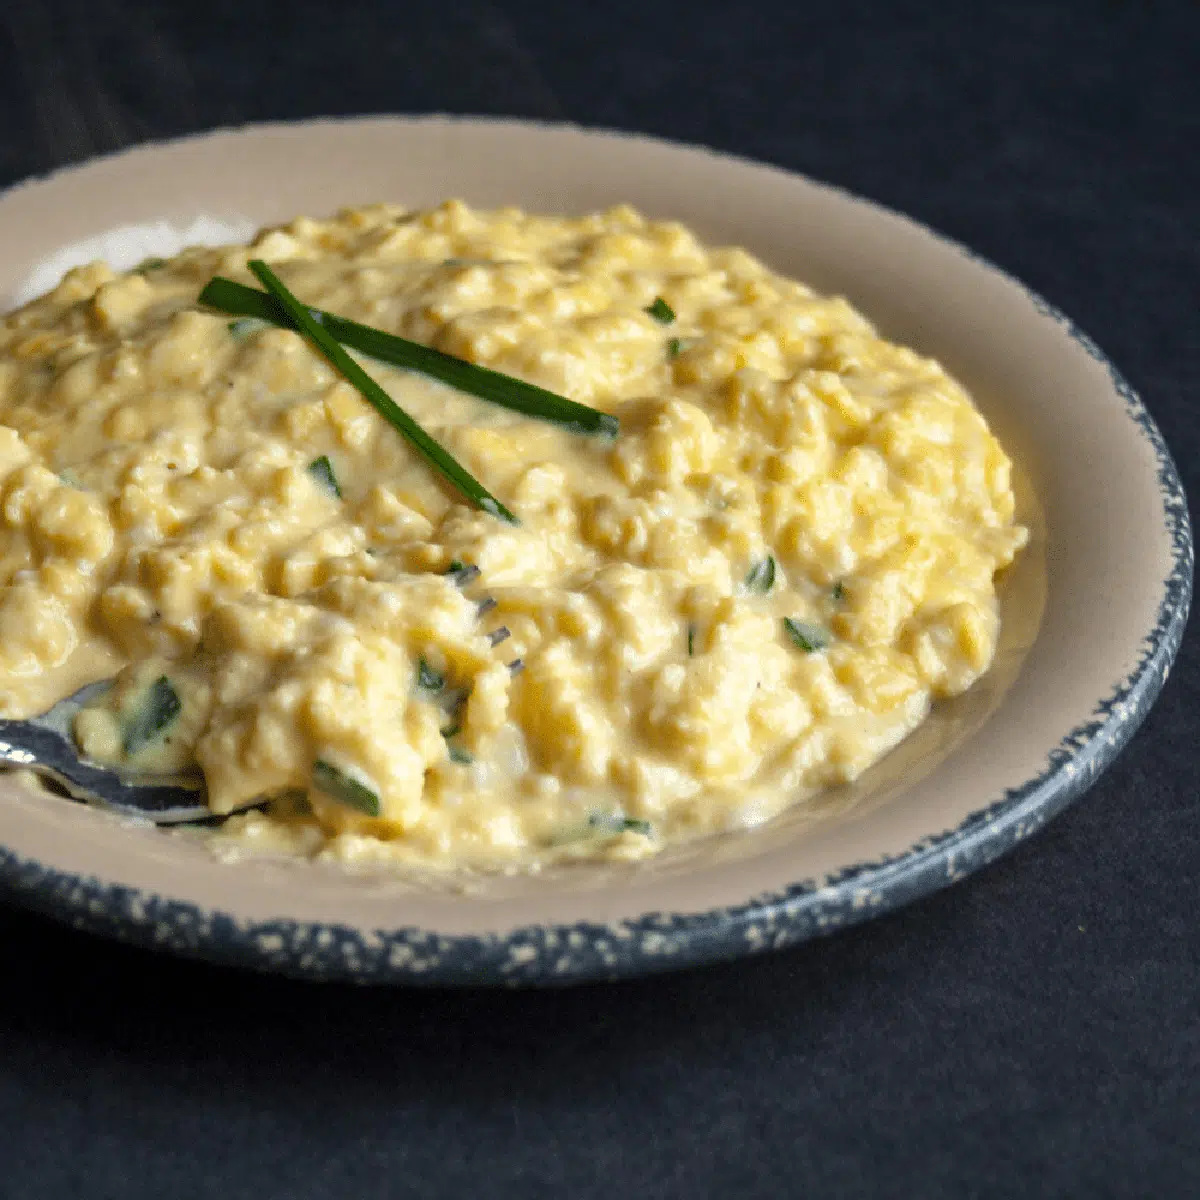 Large image of creamy Gordon Ramsay scrambled eggs with chives on top.